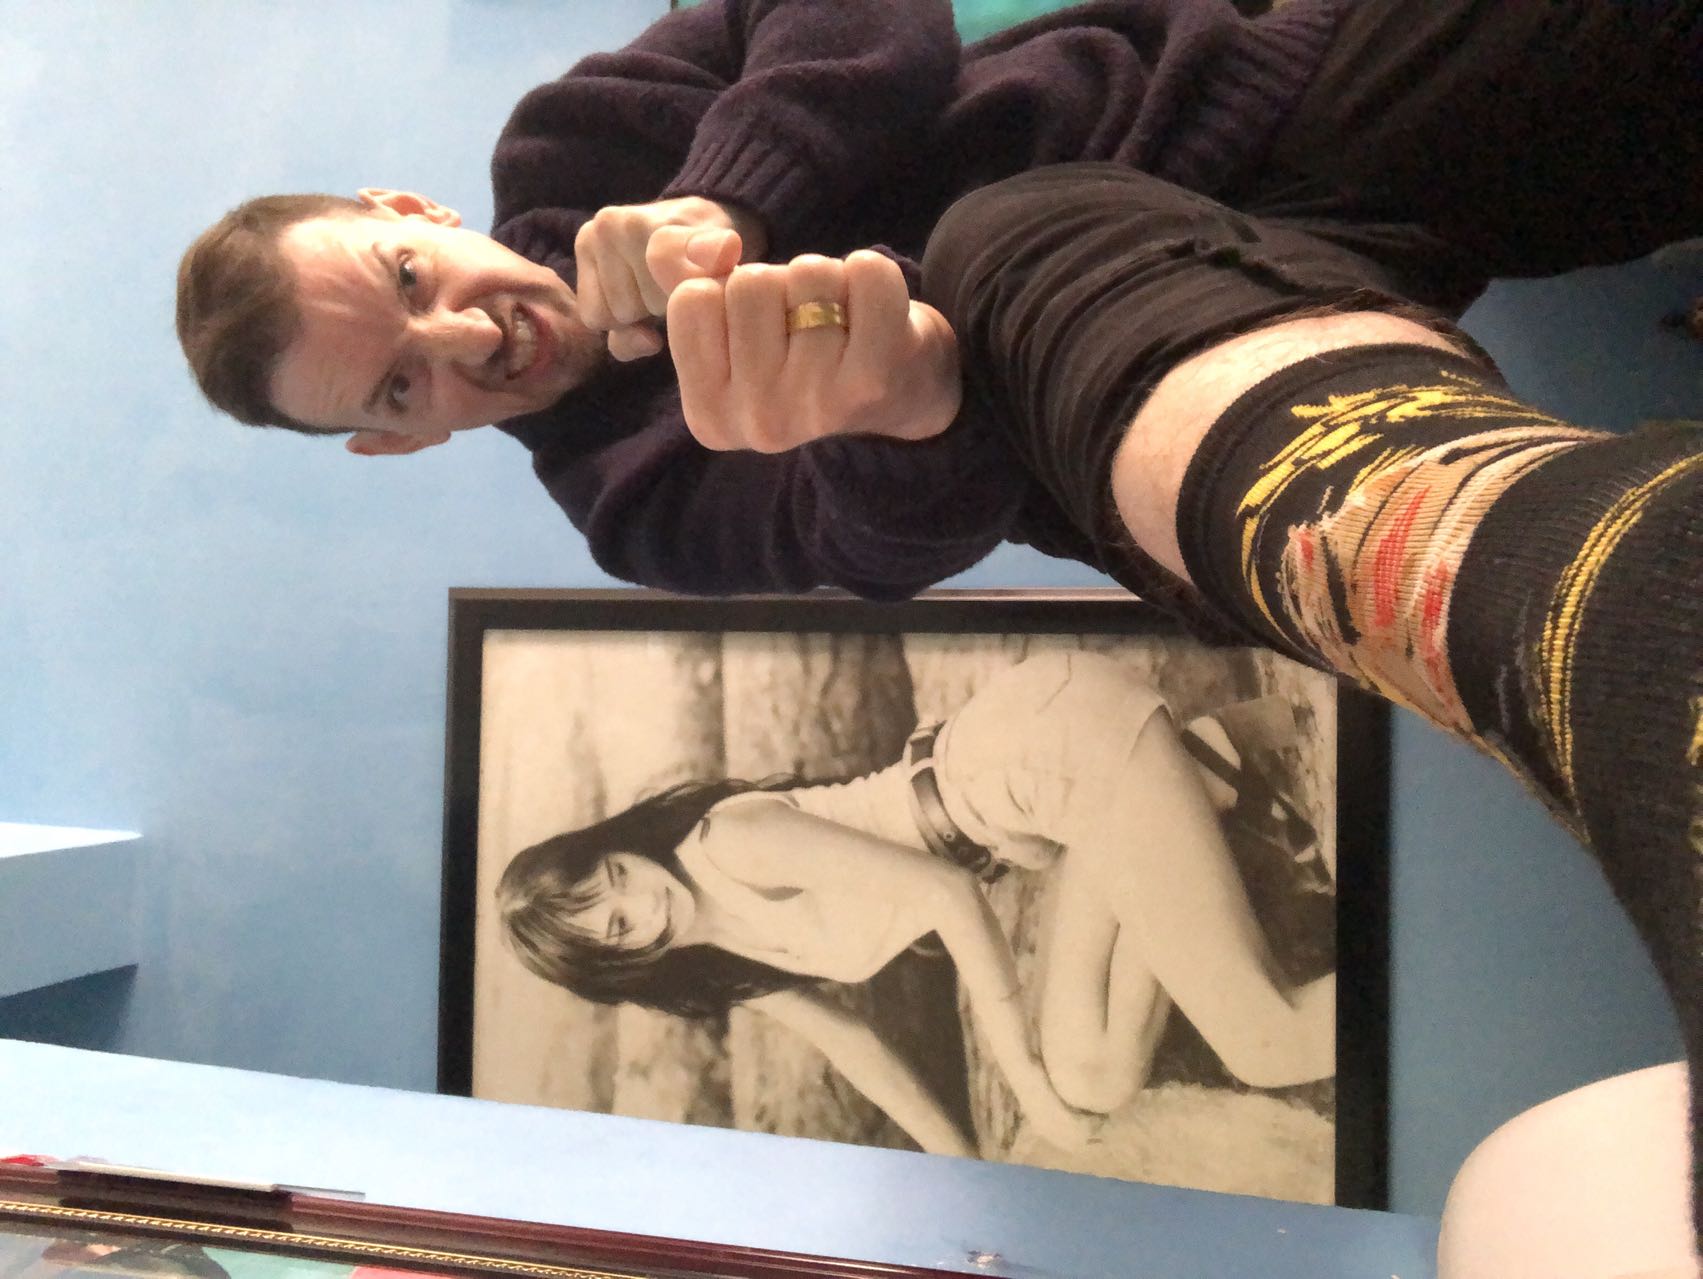 The most amazing Bruce Lee socks ... a reward for a job well done!